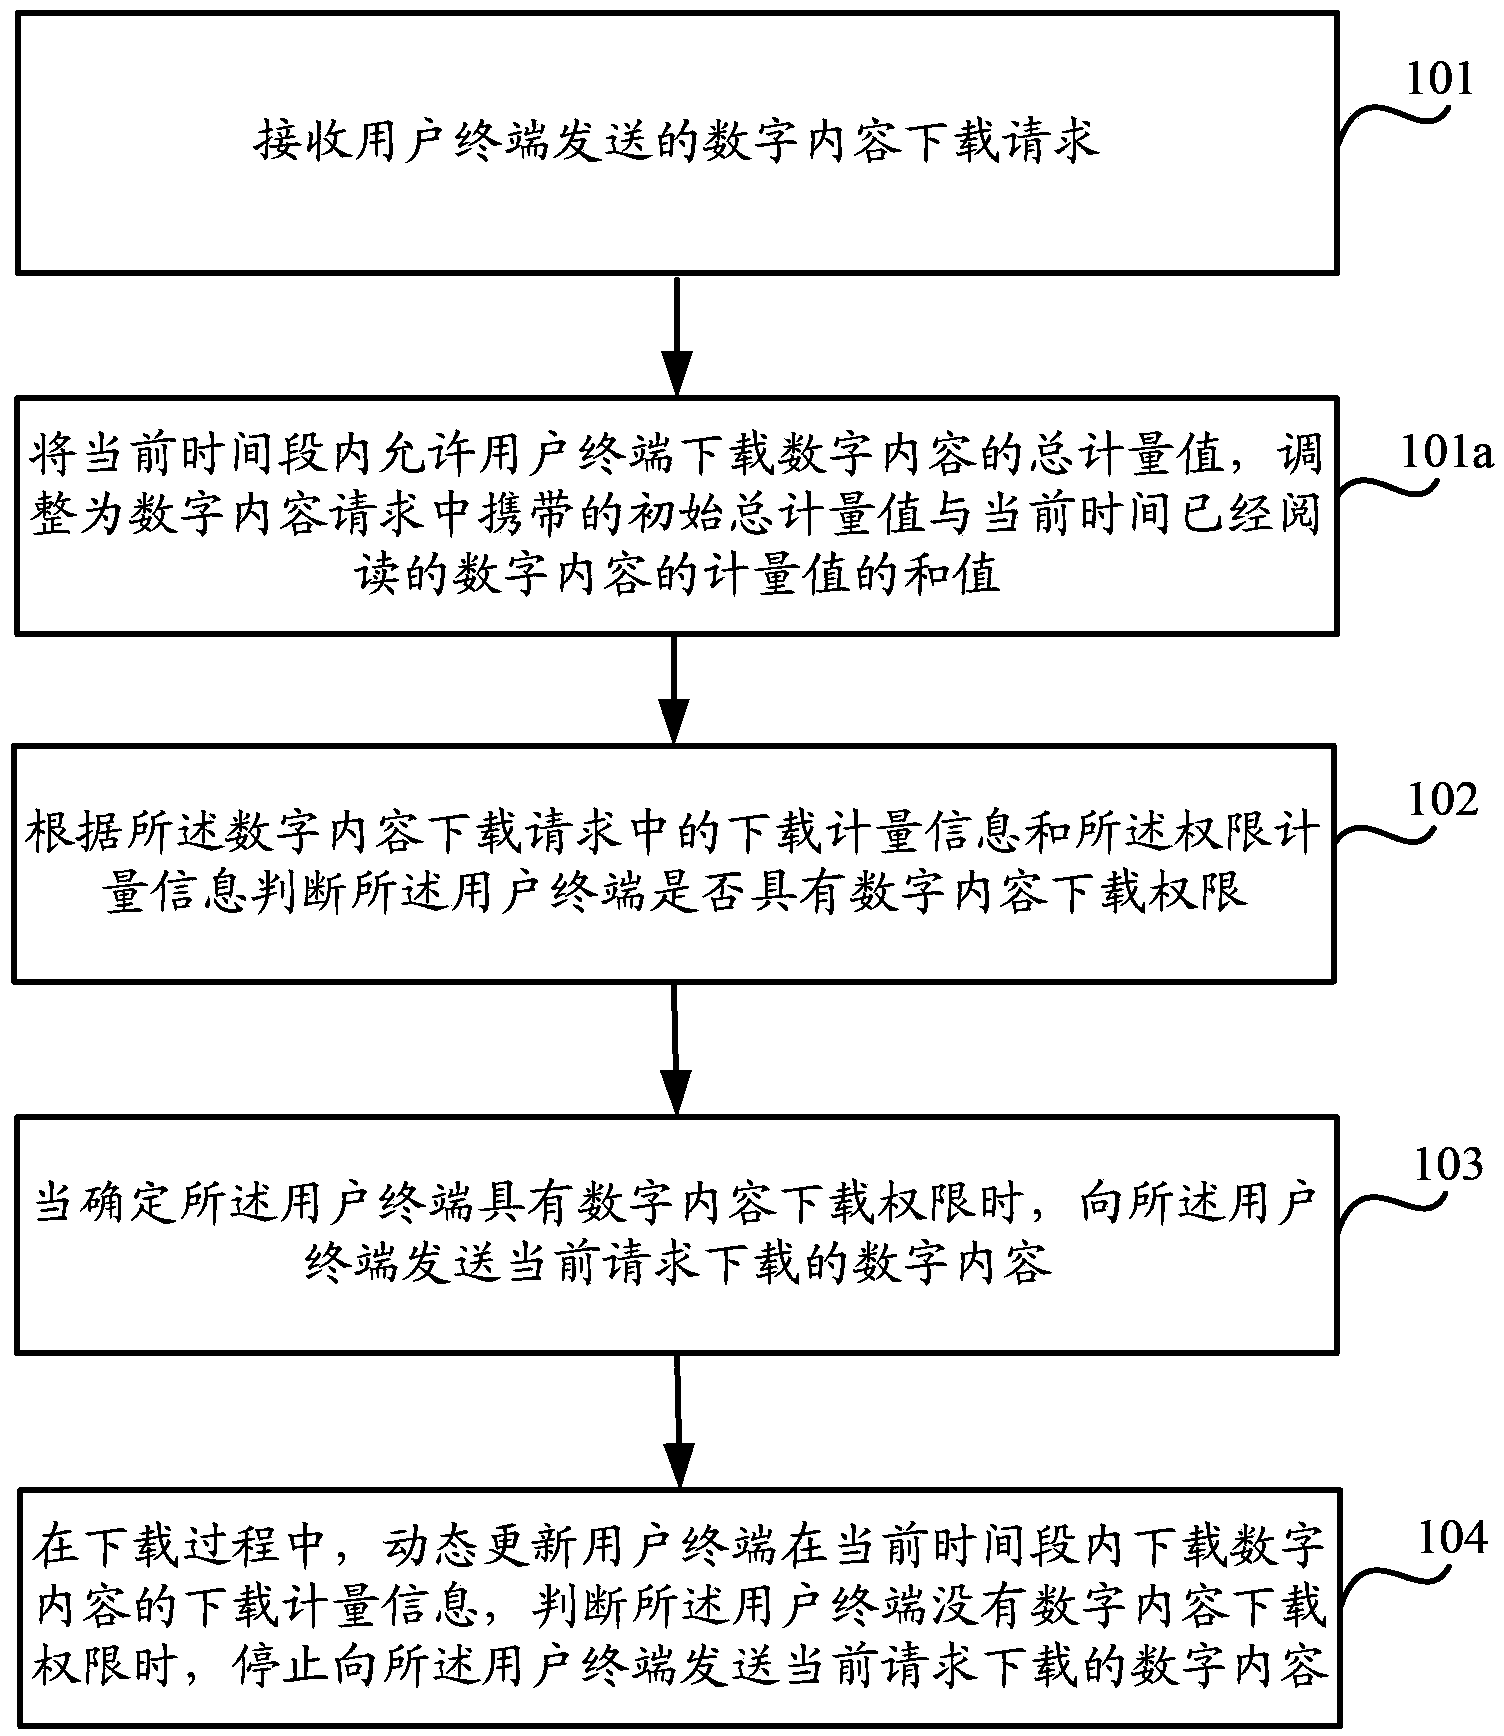 Method and apparatus for monitoring downloading of digital content, and method and apparatus for downloading digital content